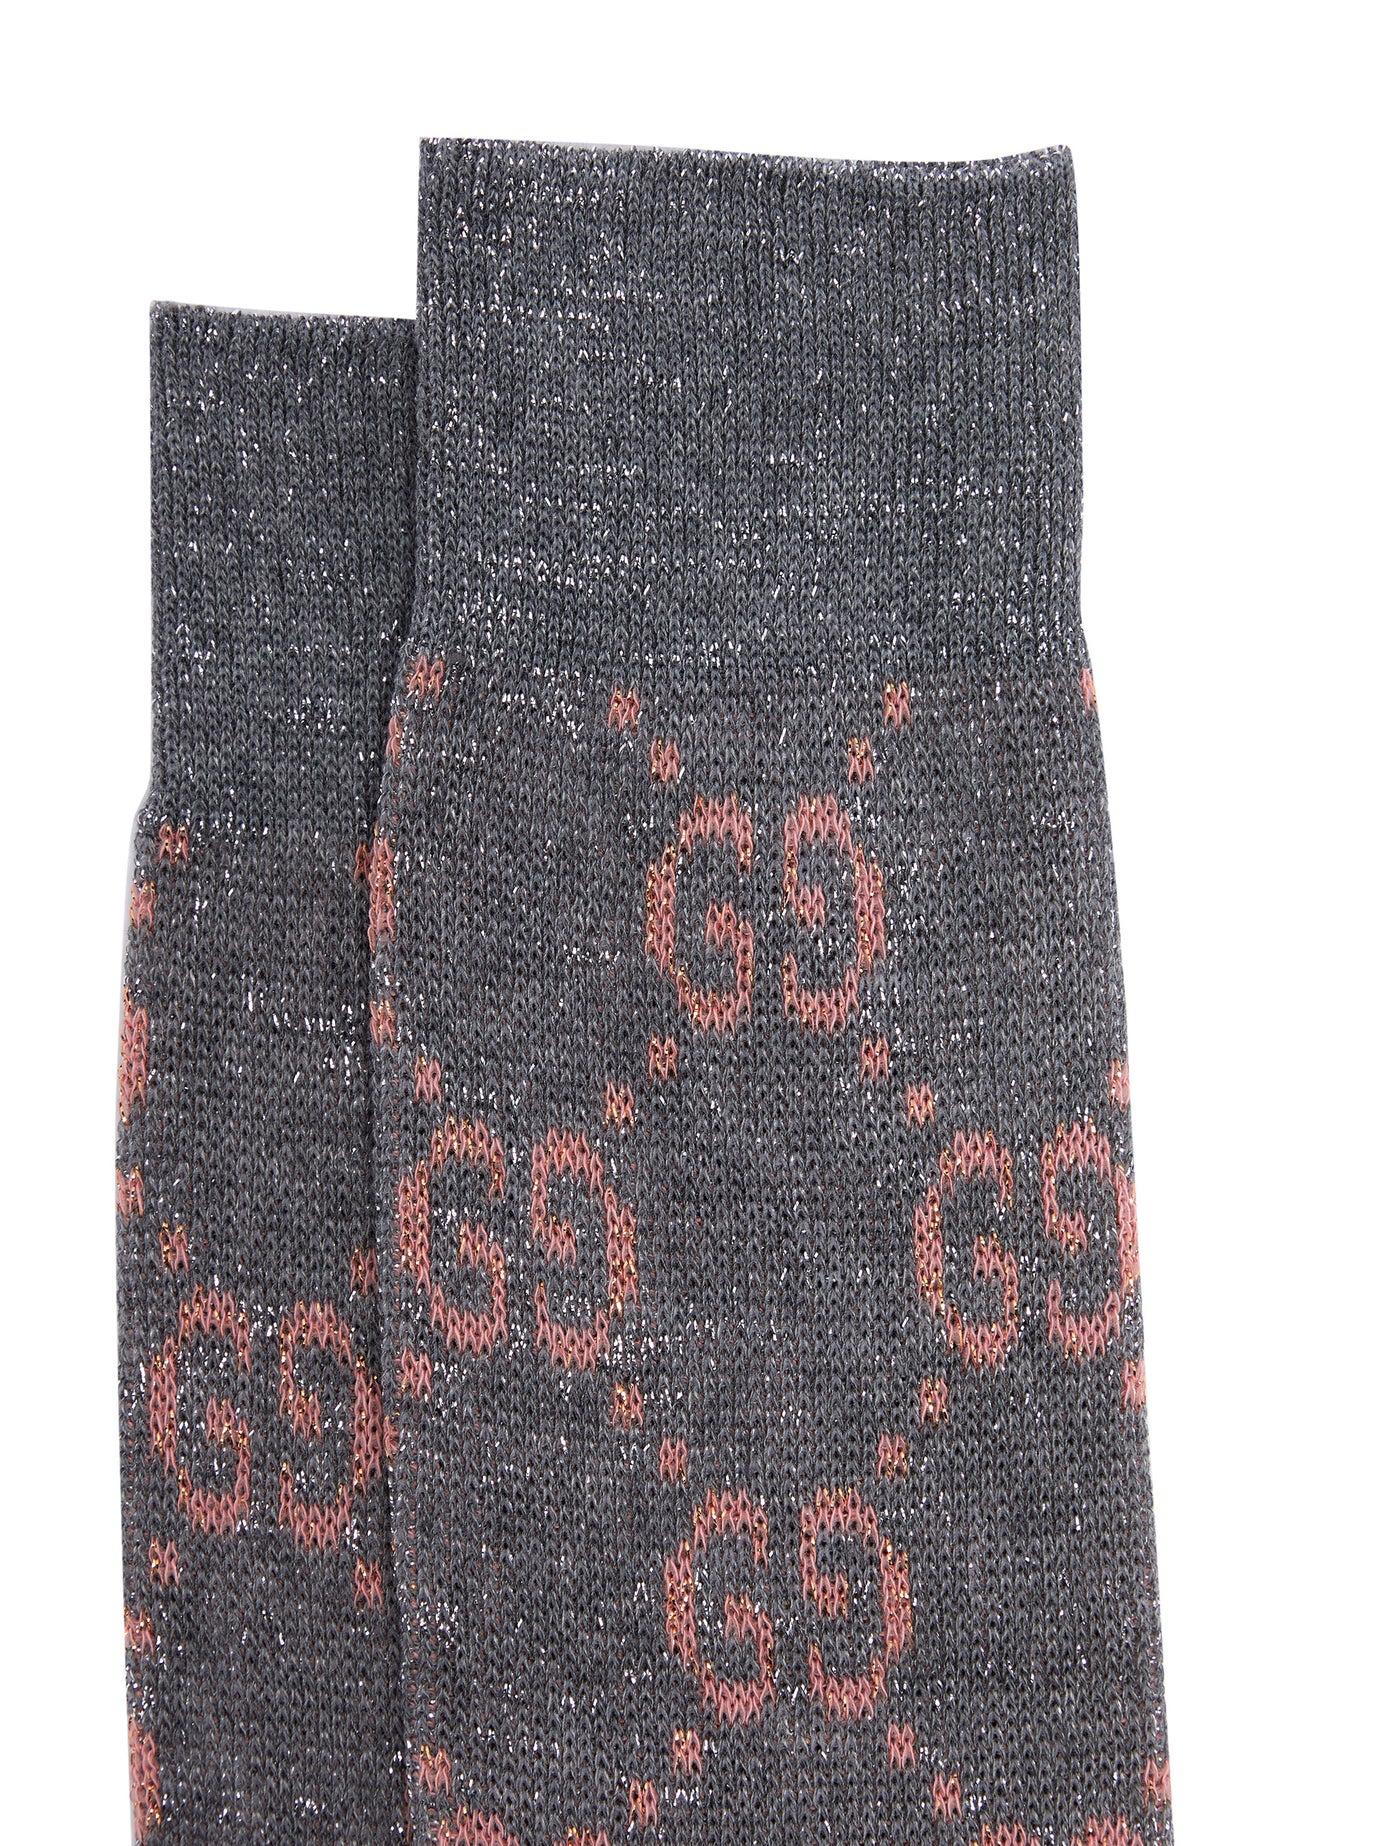 Gucci Gg Intarsia Knee High Cotton Blend Lamé Socks in Gray - Lyst